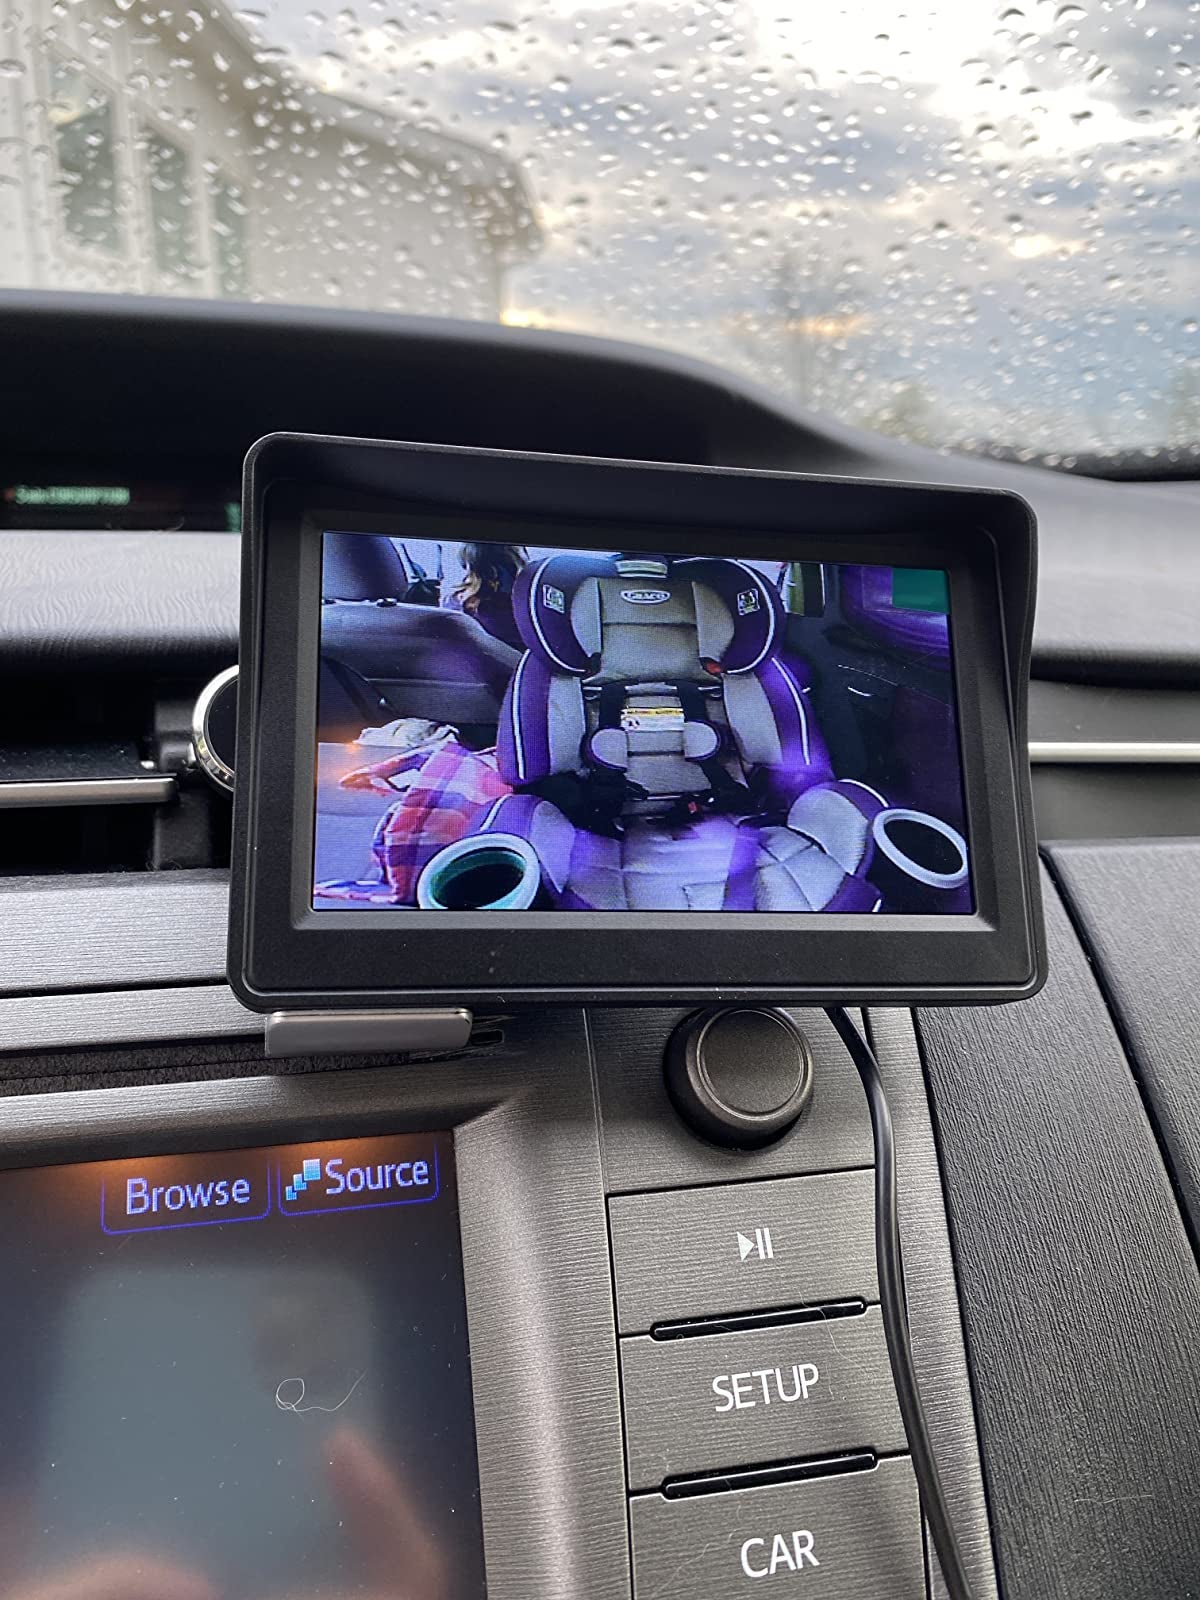 reviewer's screen attached to the dashboard of their car with a view of the carseat